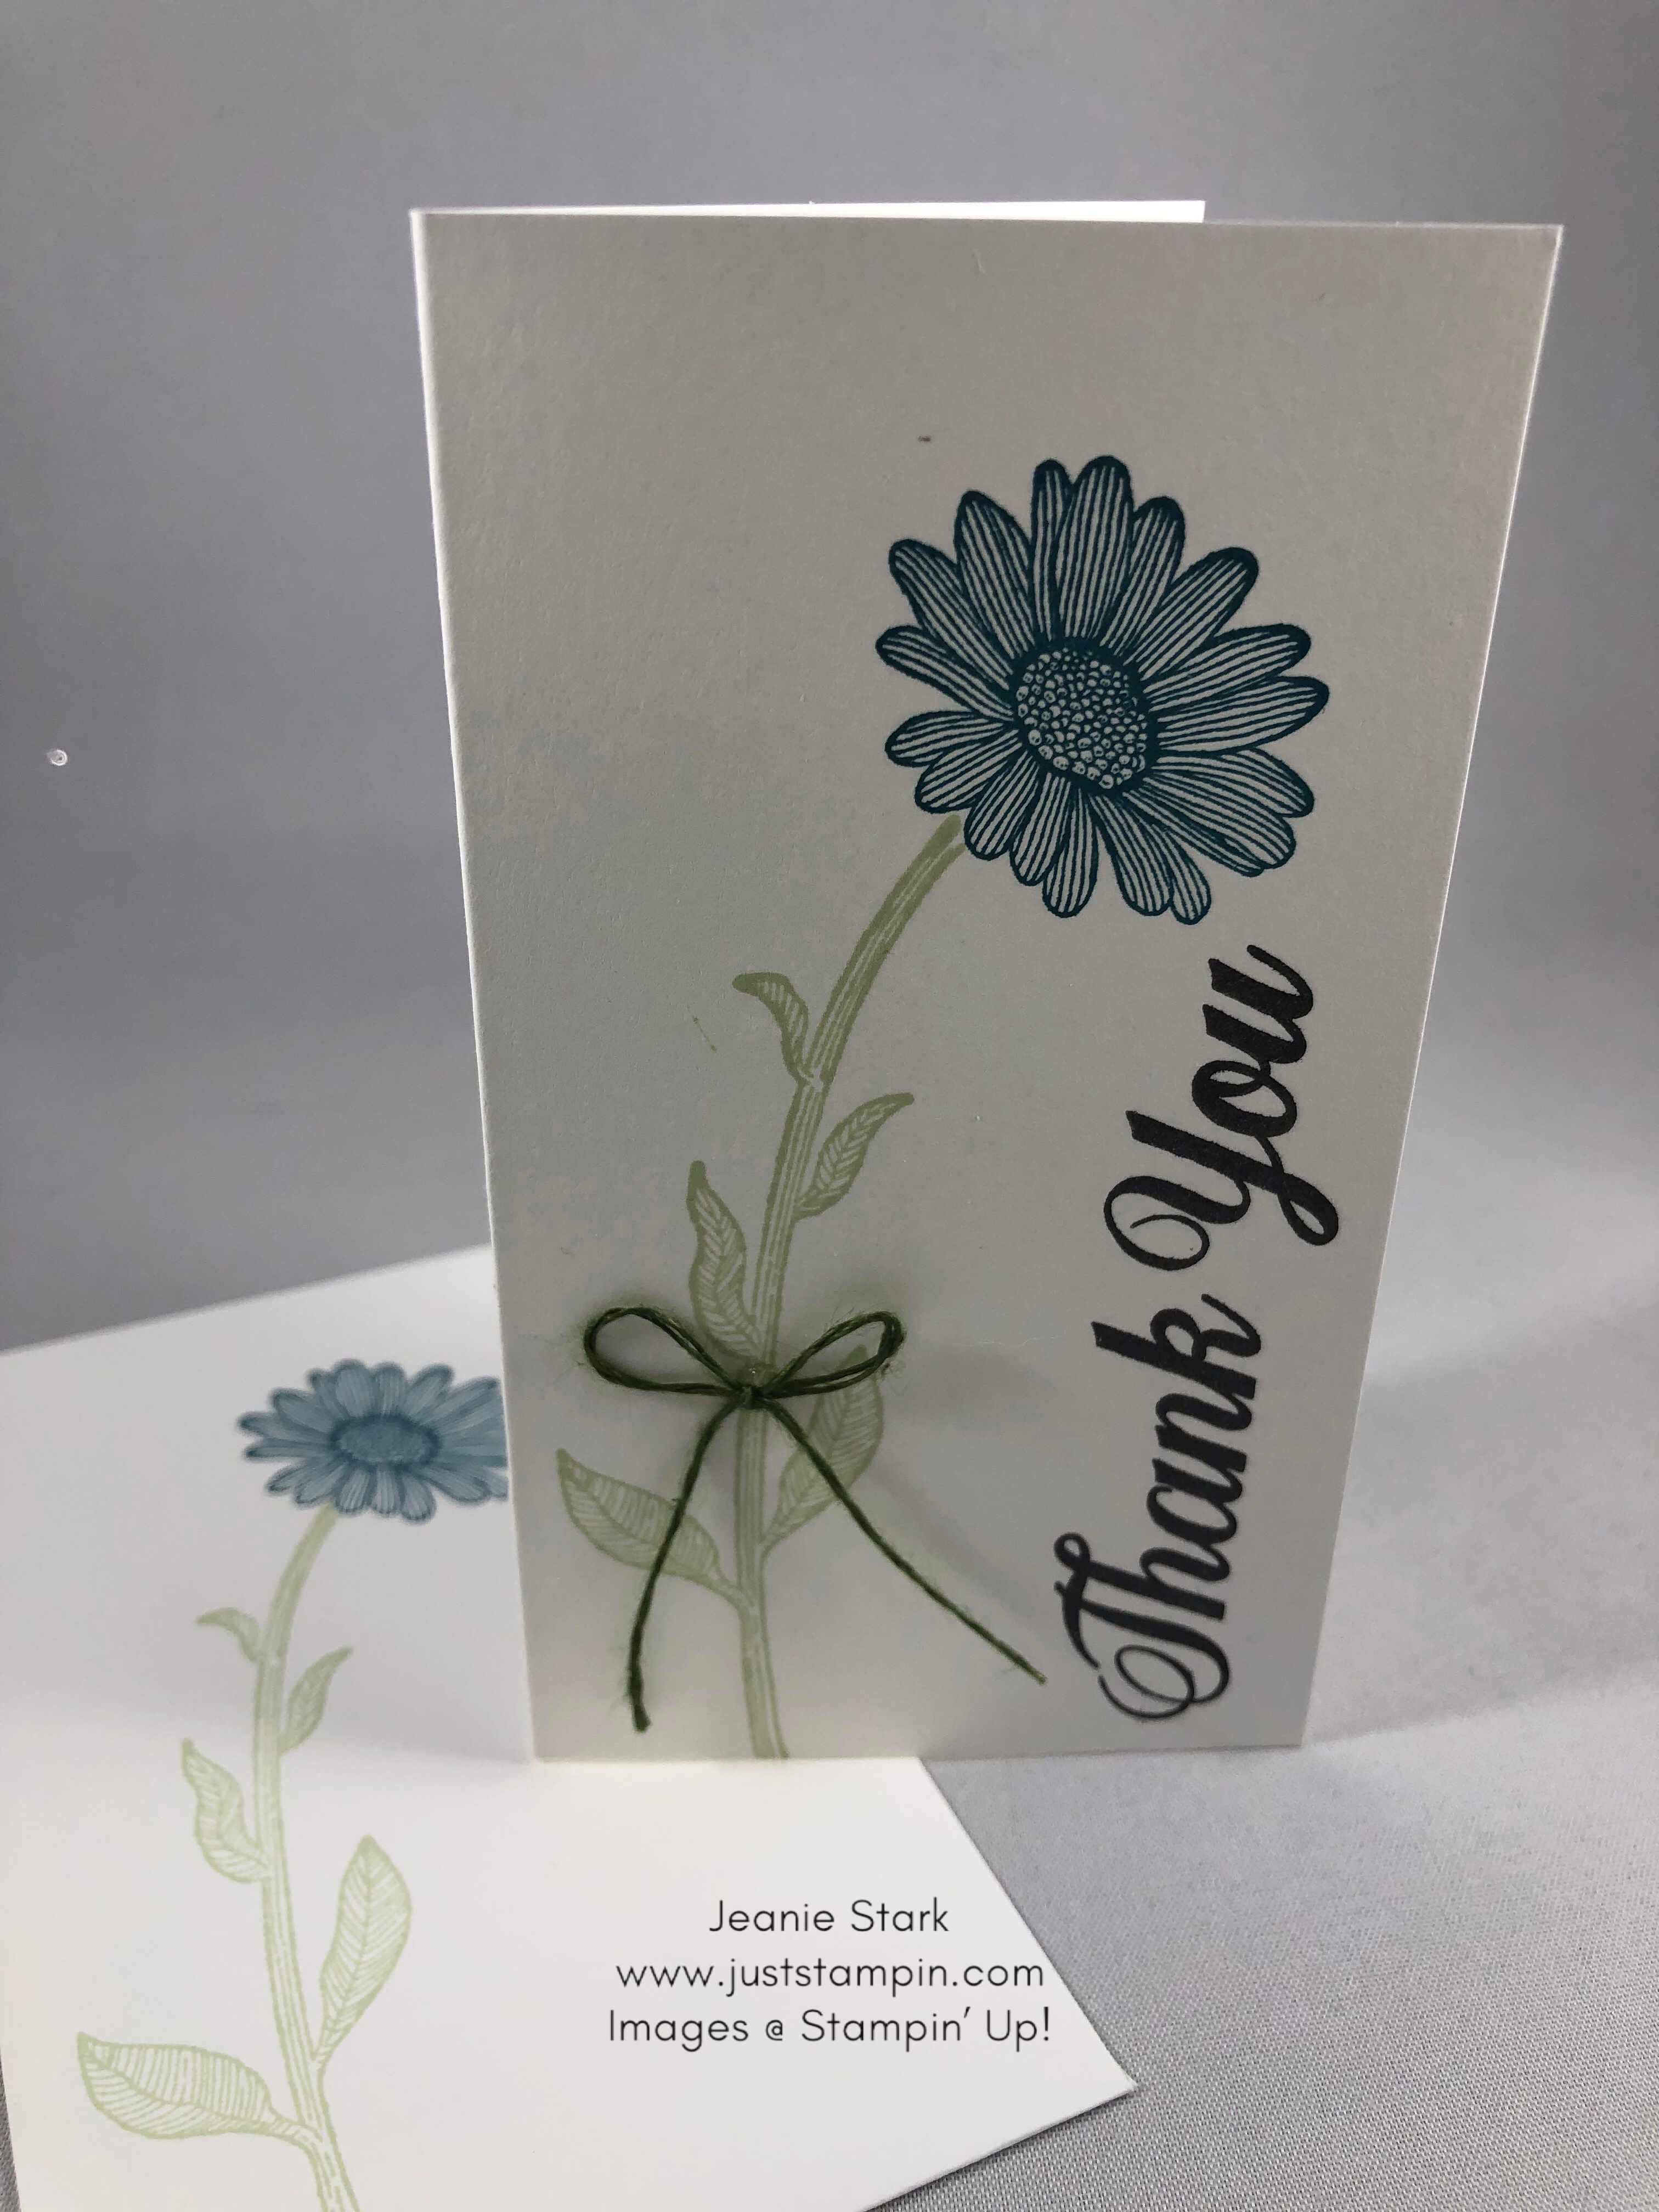 Stampin' Up! Daisy Lane Pretty Peacock thank you note card idea - Jeanie Stark StampinU